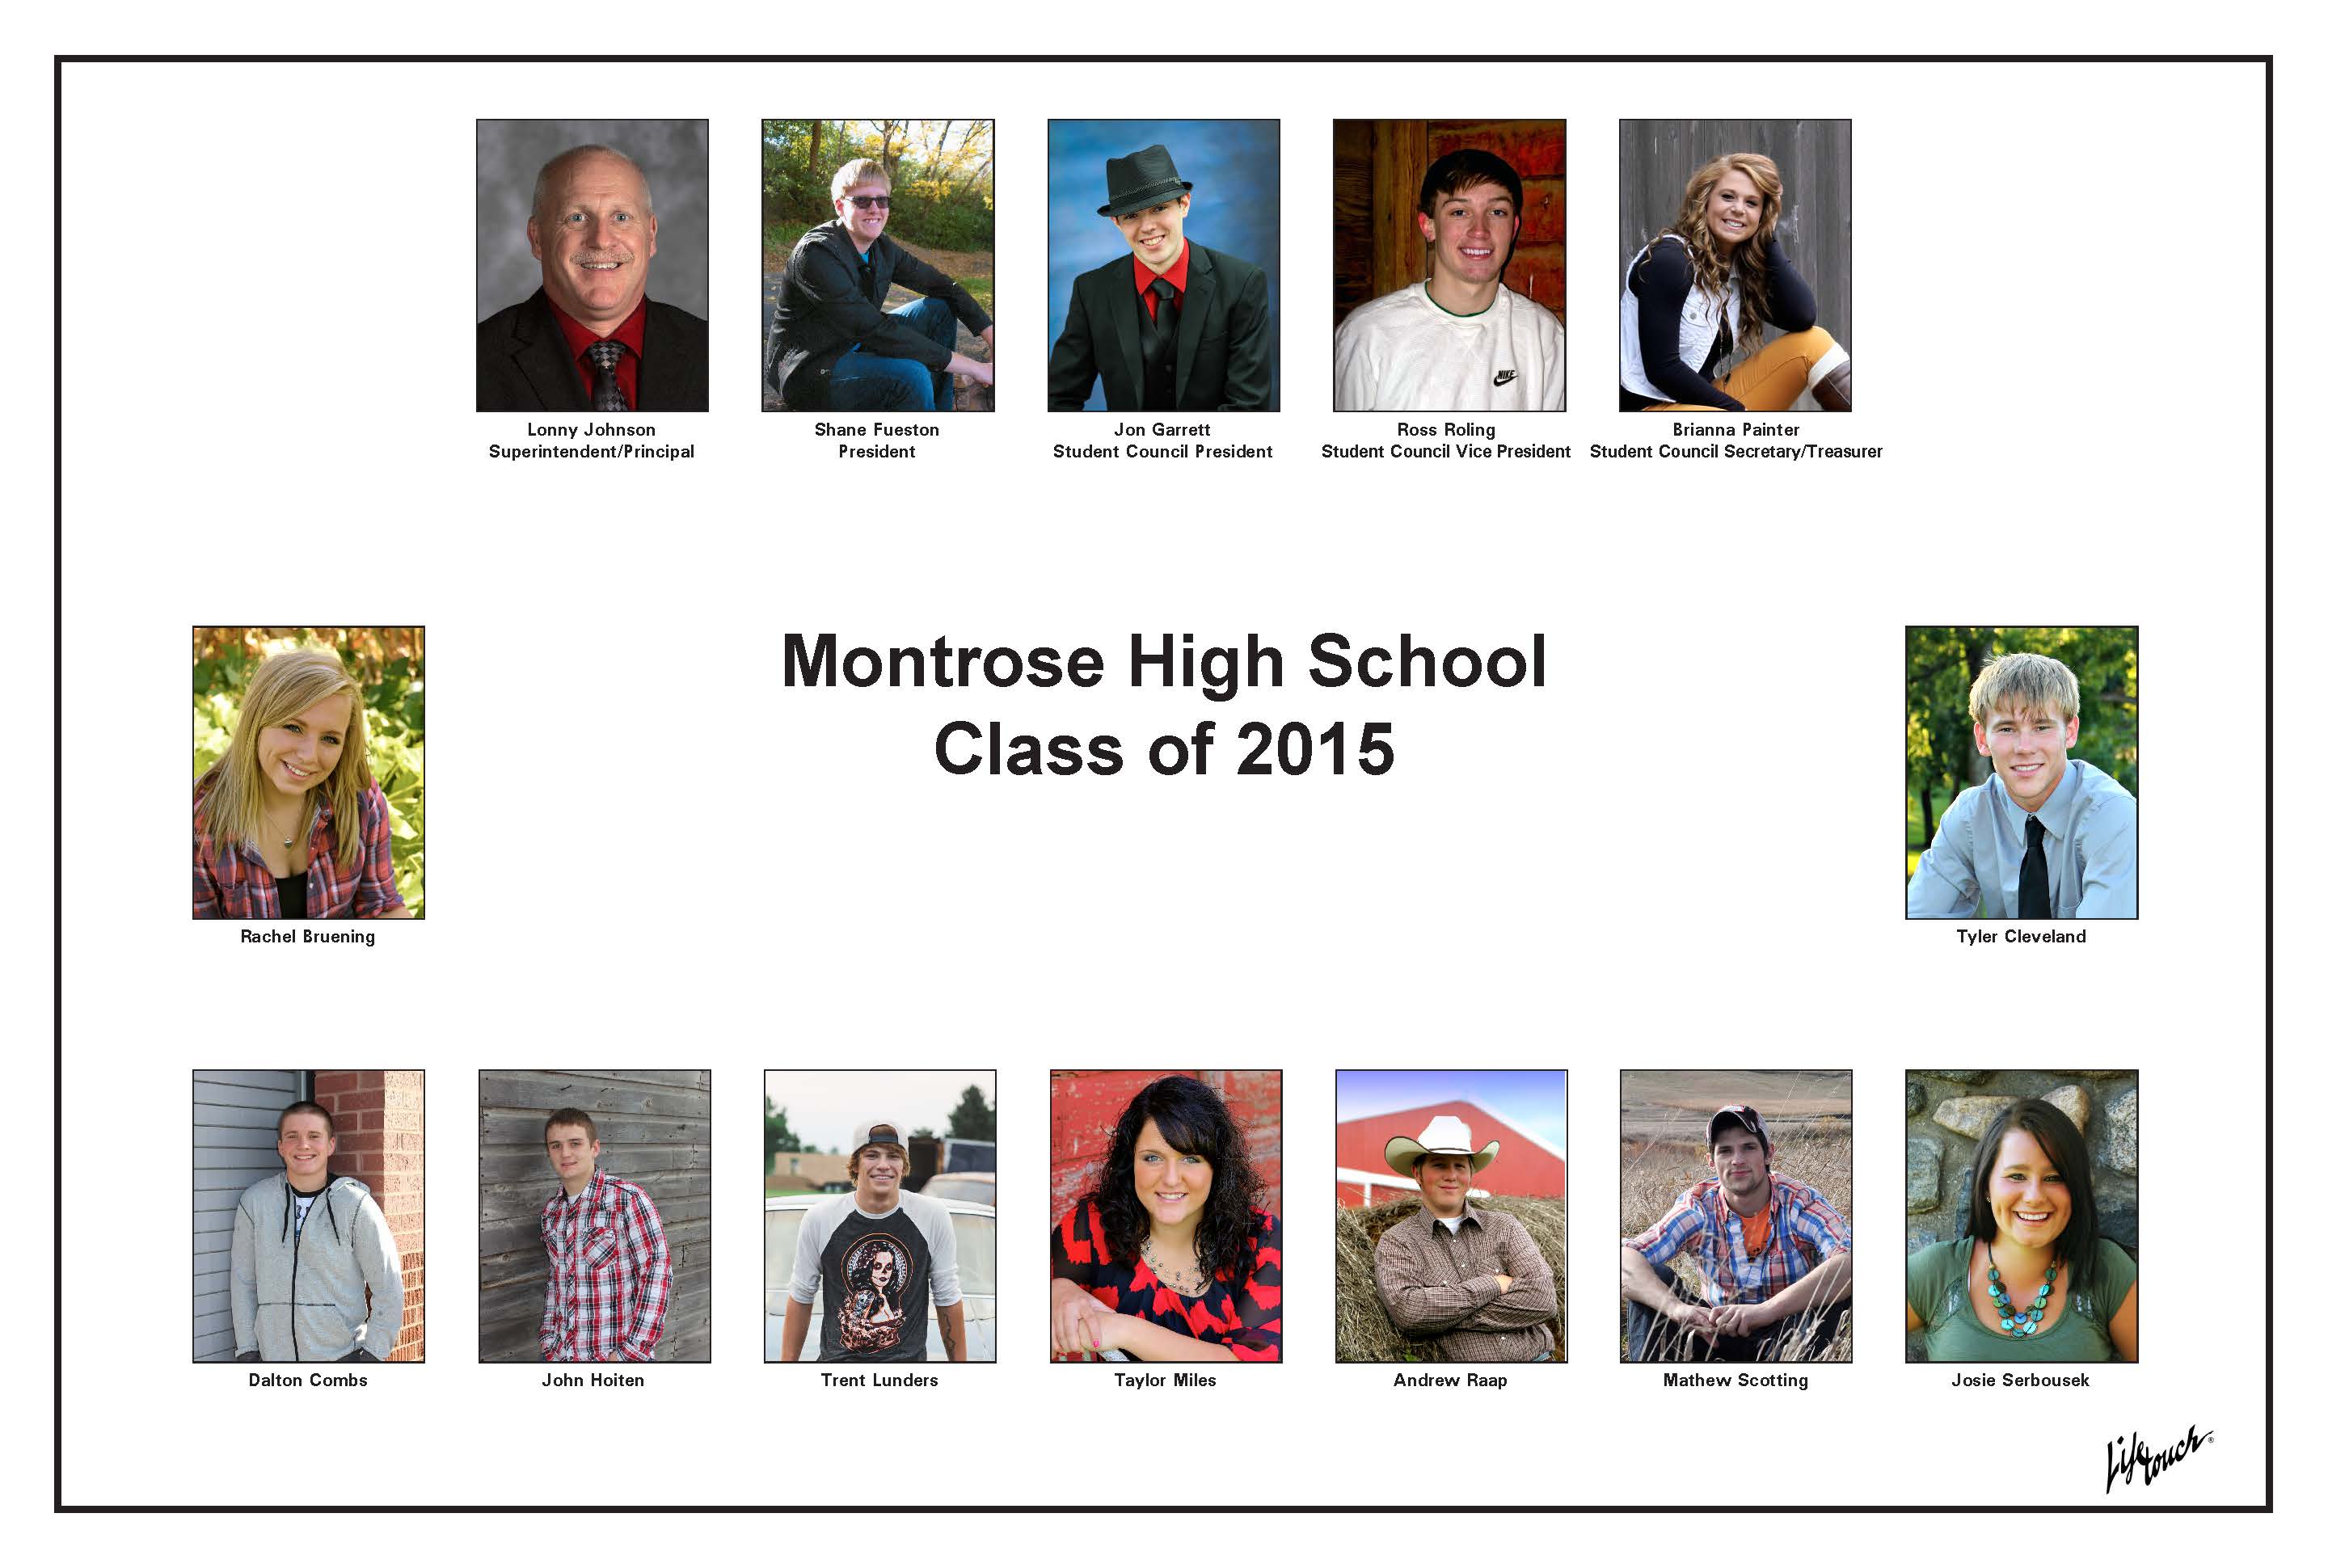 Photos of the Class of 2015.